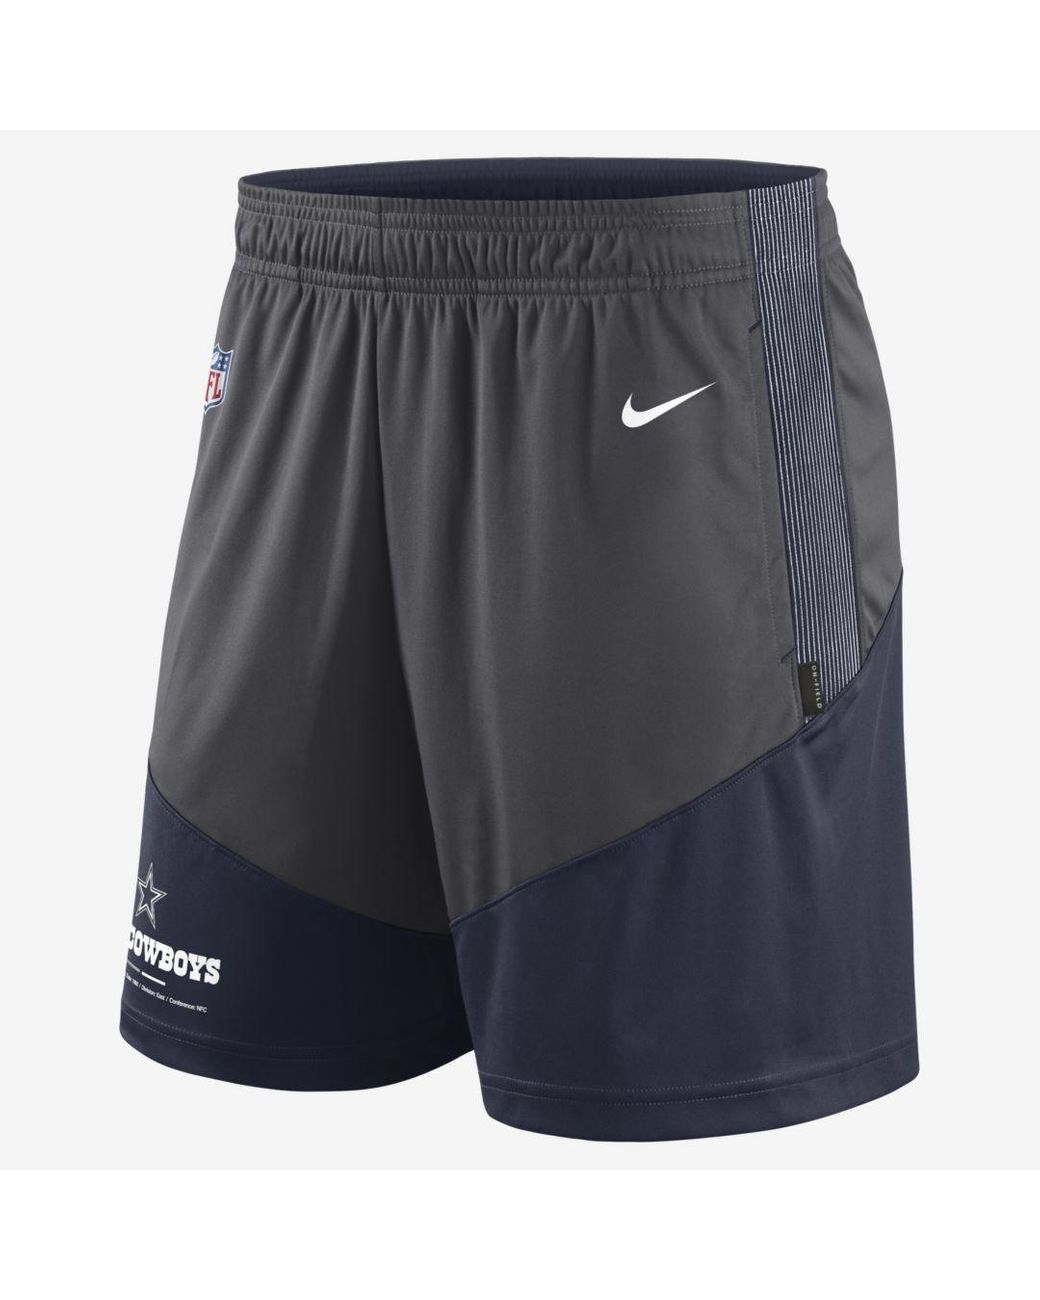 Nike Synthetic Dri-fit Primary Lockup Shorts in Anthracite,Navy (Blue ...